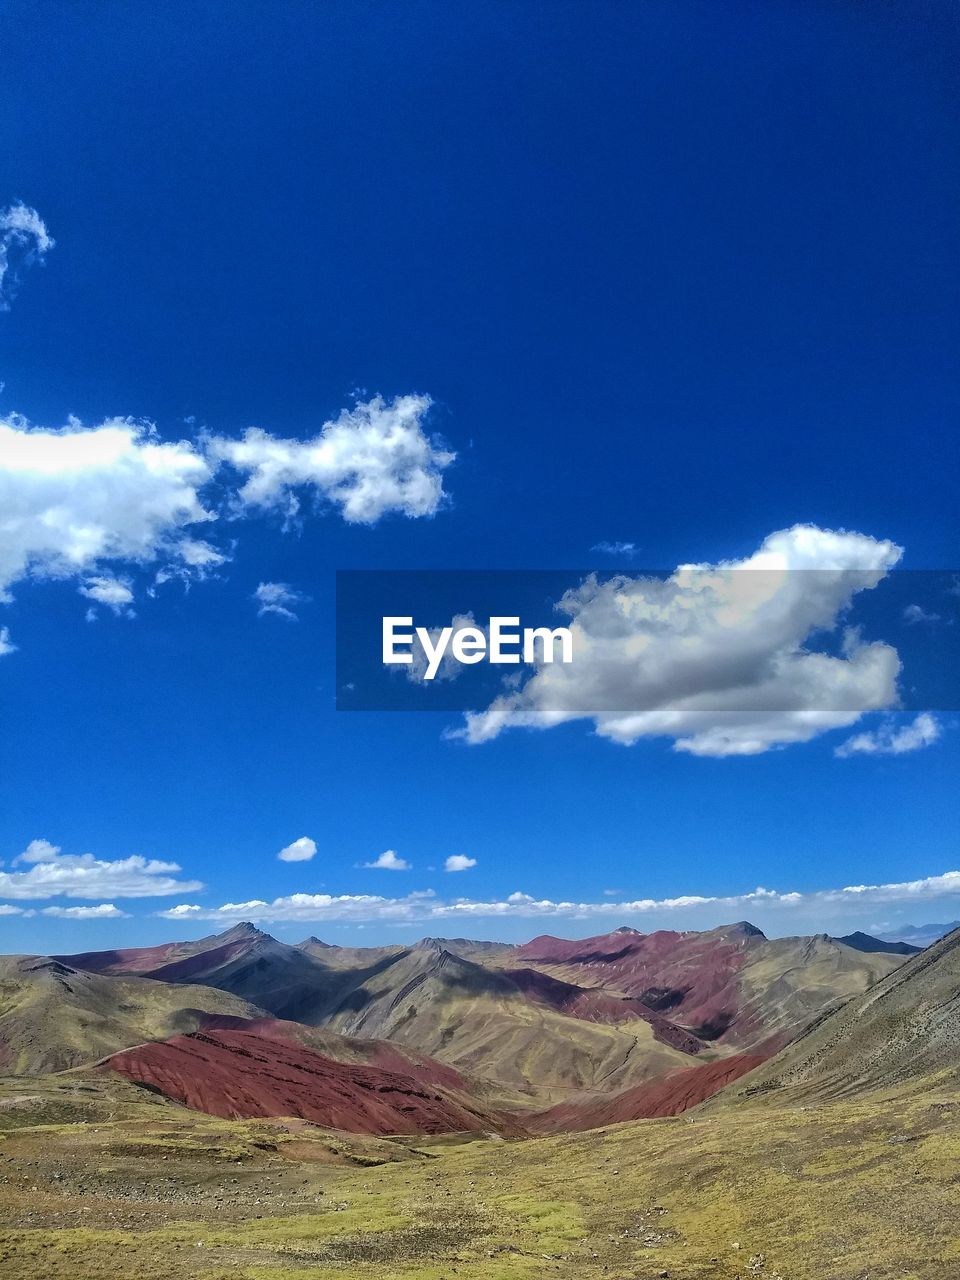 SCENIC VIEW OF LAND AND MOUNTAINS AGAINST BLUE SKY